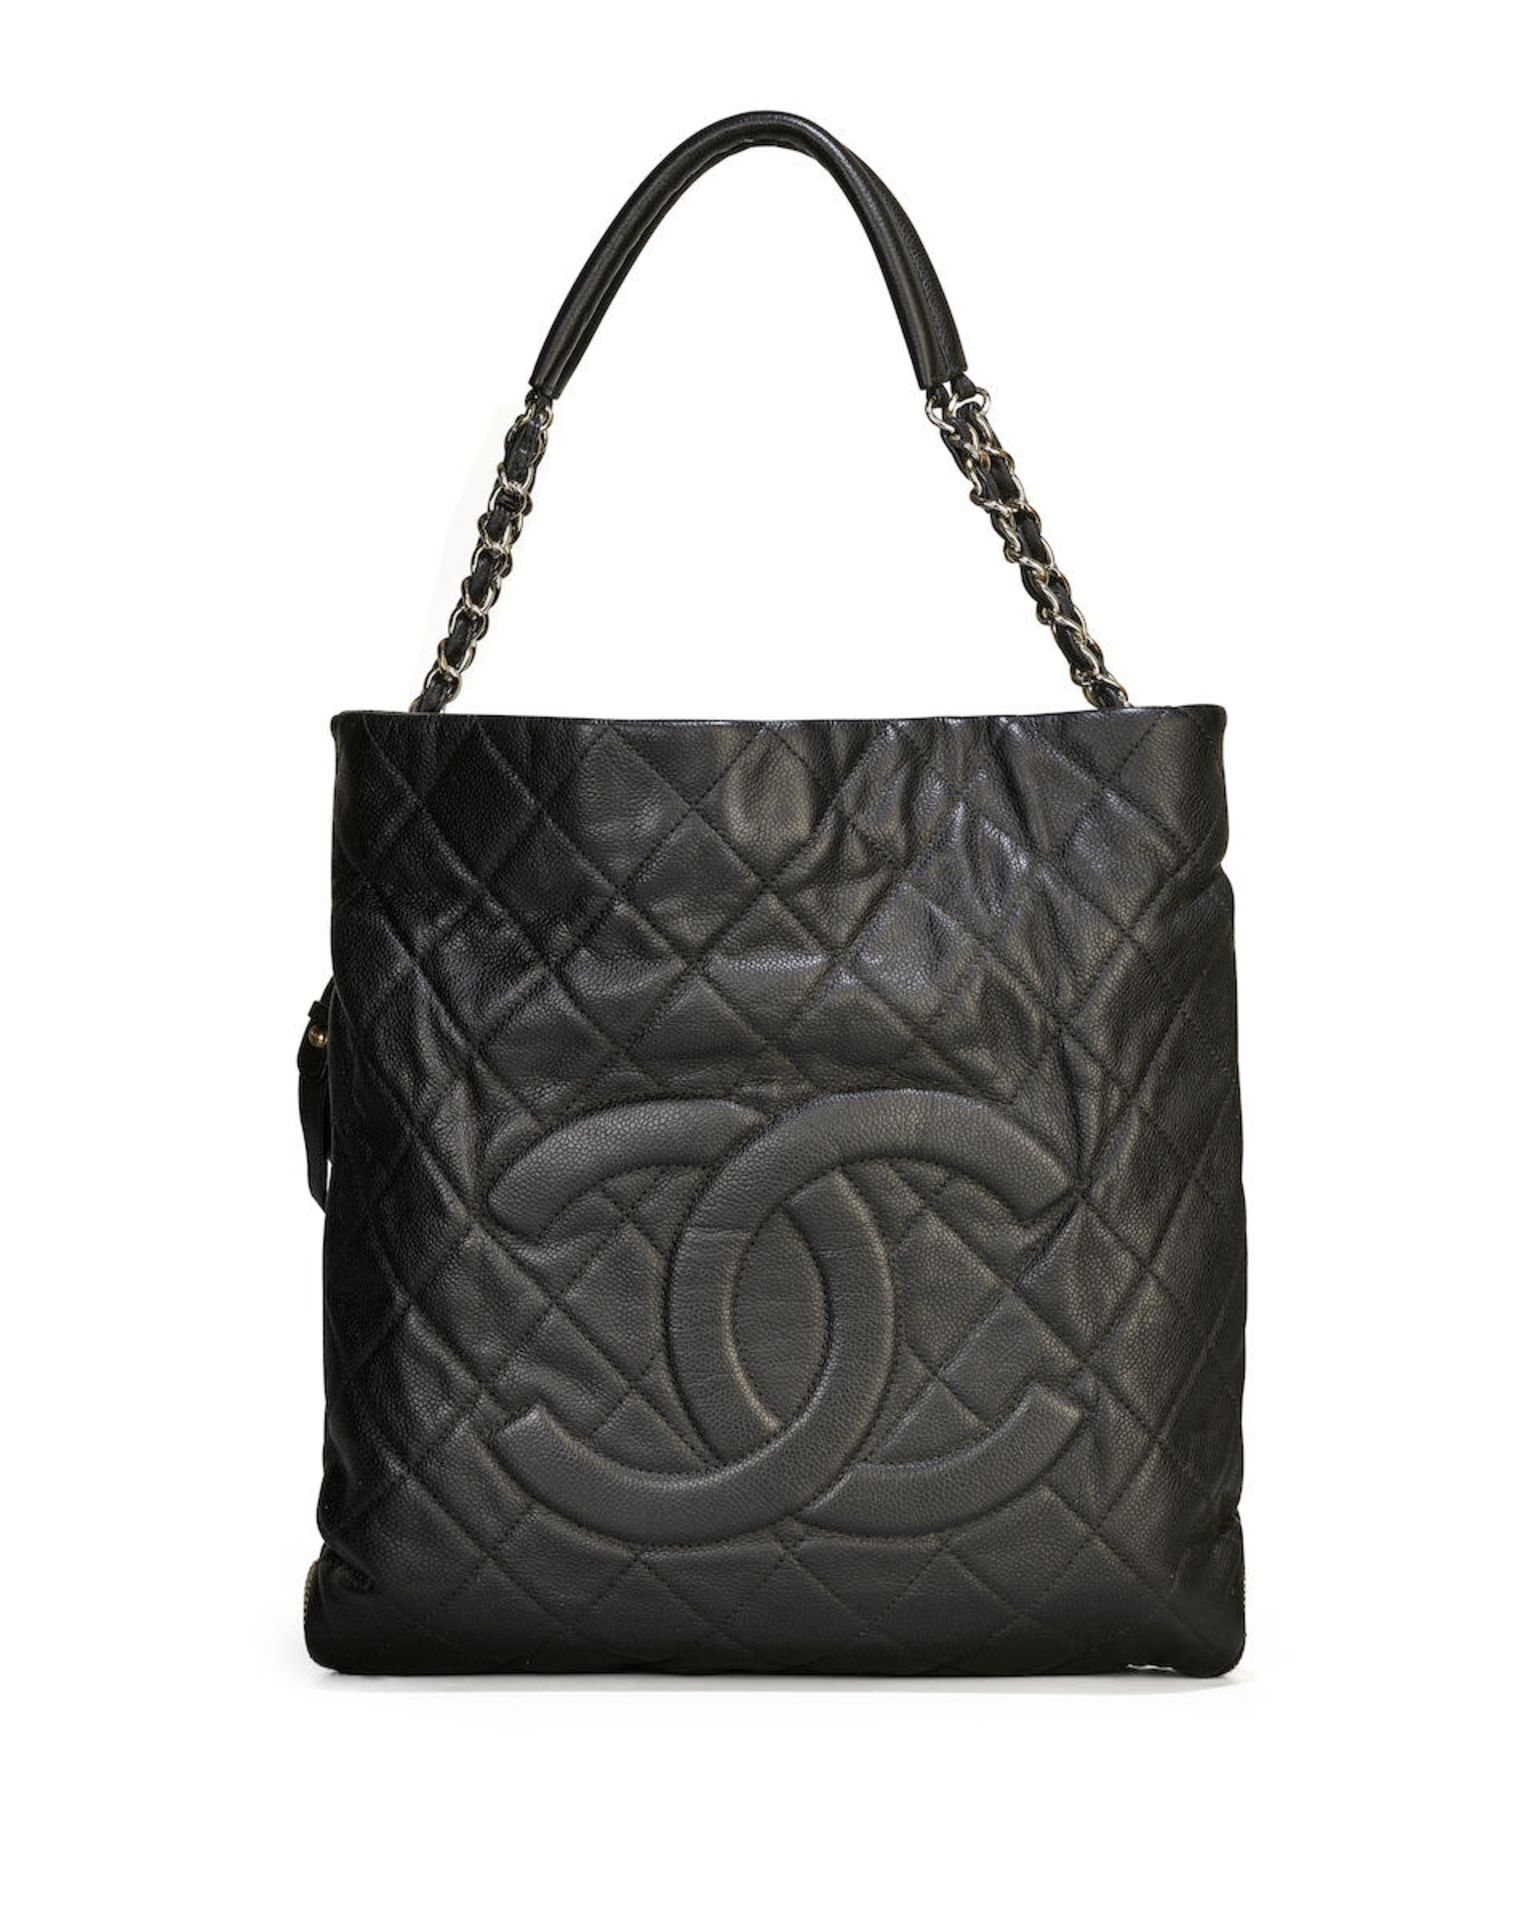 CHANEL: BLACK CAVIAR BOHO TOTE BAG WITH SILVER TONED HARDWARE